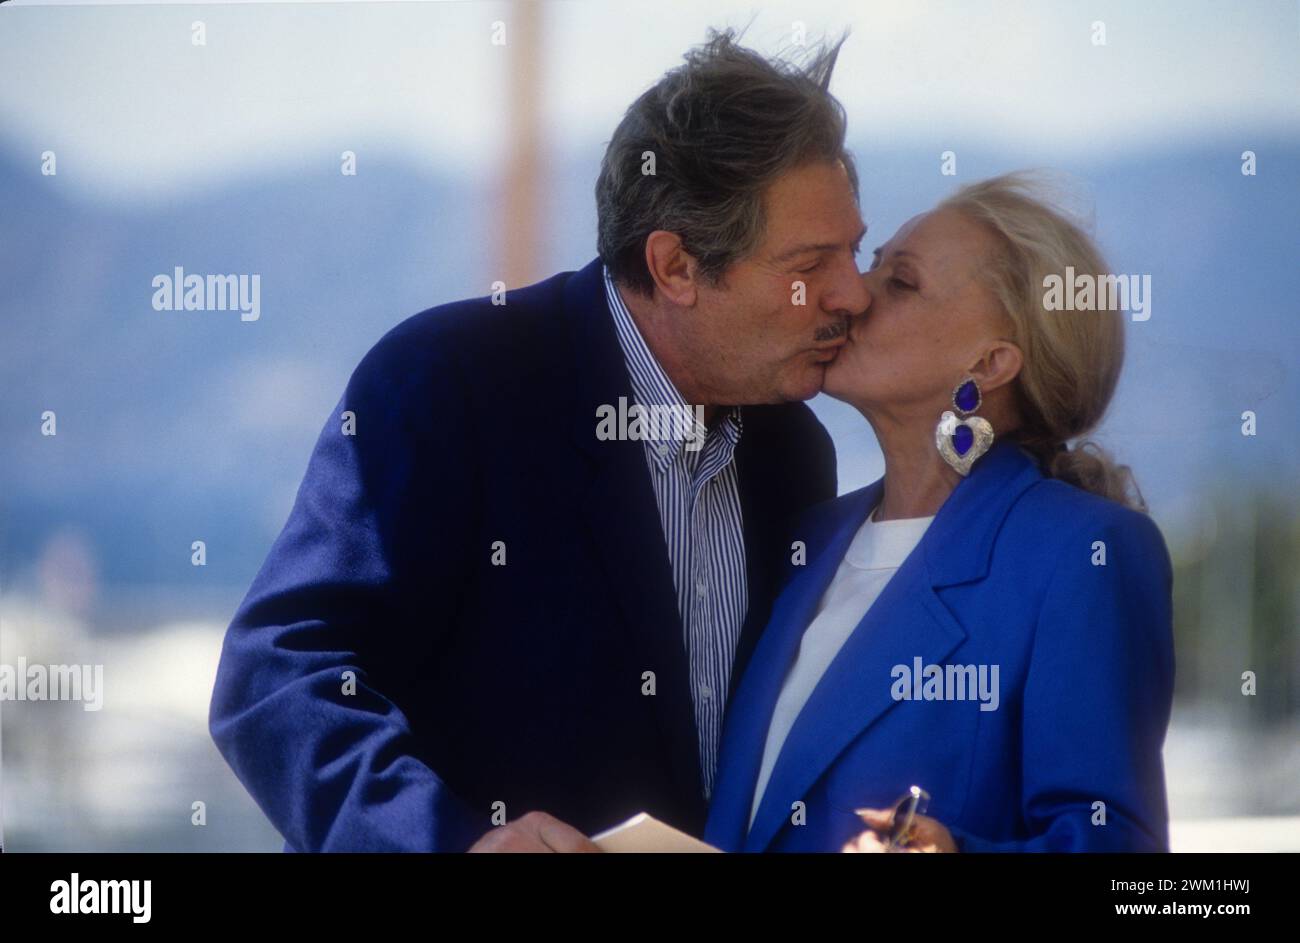 4069402 Cannes Film Festival, 1991. Actors Marcello Mastroianni, And Jeanne Moreau starring of the movie 'The Suspended Step of the Stork' (To meteoro vima tou pelargou) directed by Theo Angelopoulos (photo); (add.info.: Cannes, France; Francia,   Festival del Cinema di Cannes 1991. Gli attori Marcello Mastroianni E Jeanne Moreau, in concorso con il film 'Il passo sospeso della cicogna' (To meteoro vima tou pelargou) di Theo Angelopoulos); © Marcello Mencarini. All rights reserved 2024. Stock Photo